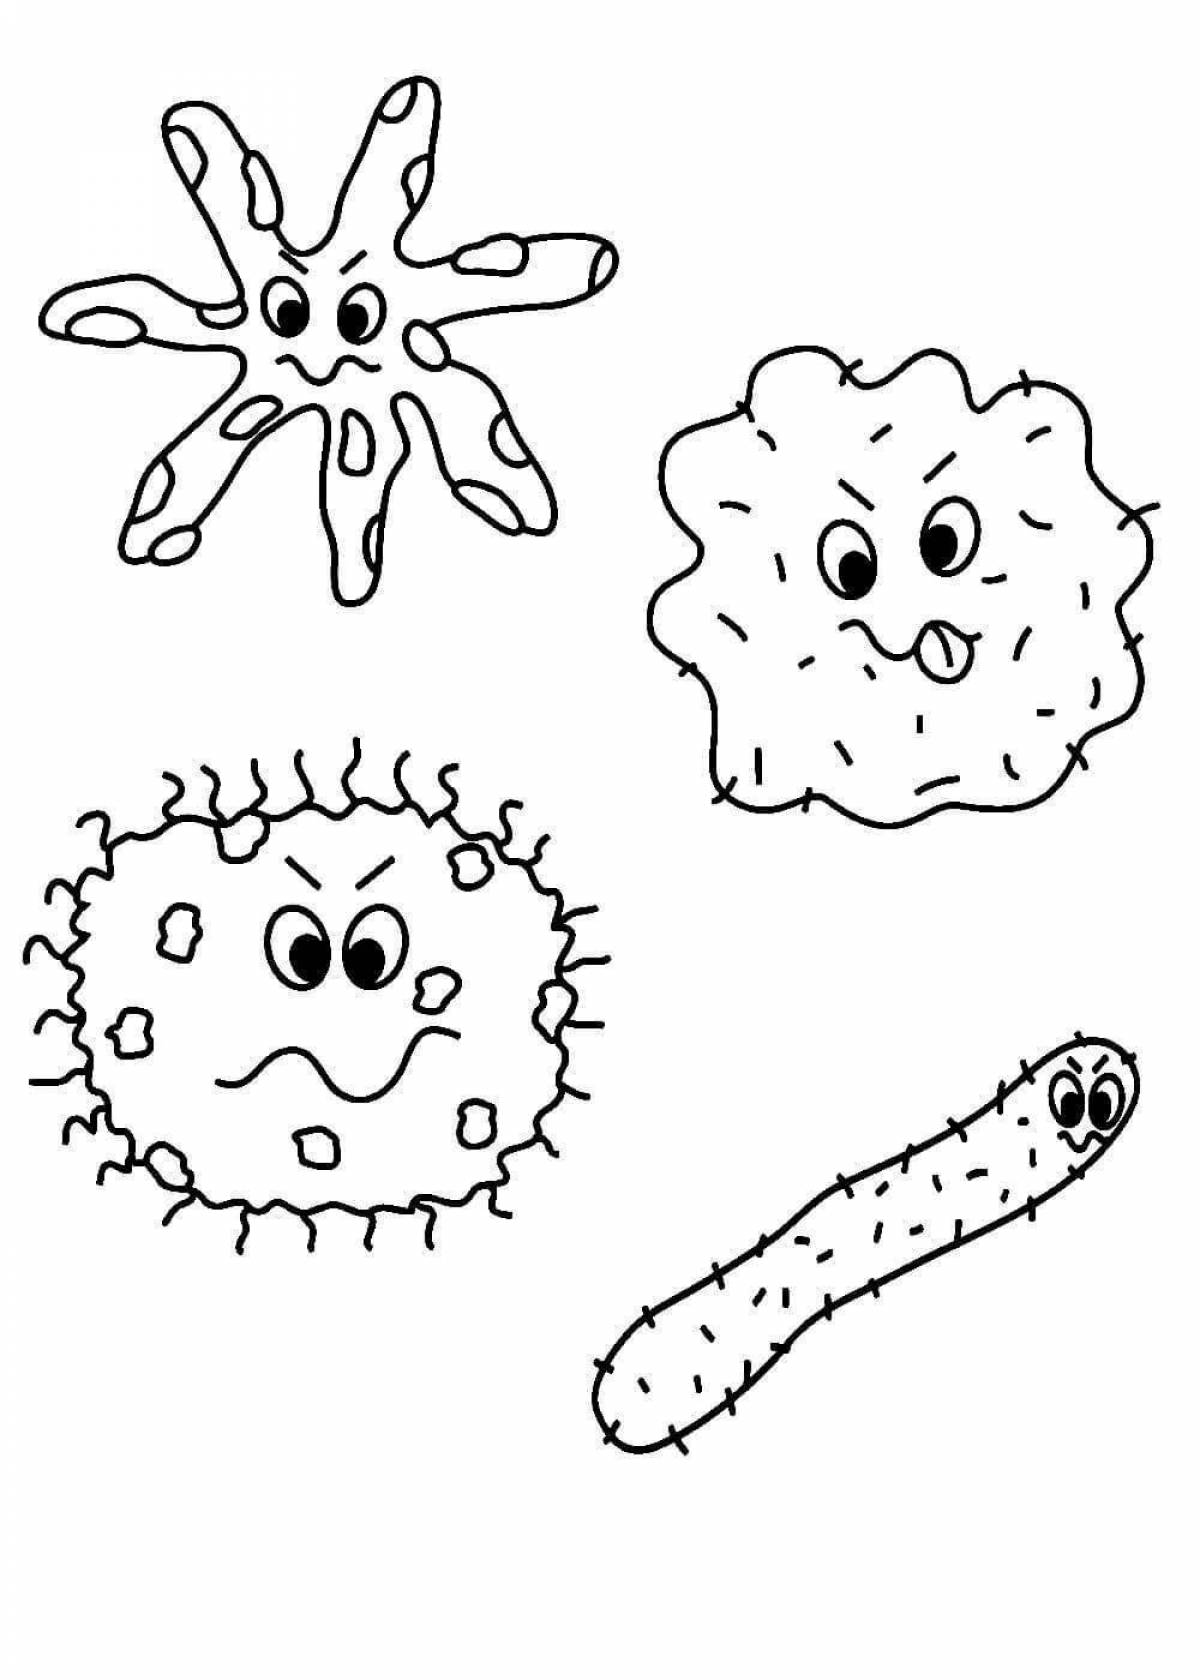 Witty germs and bacteria coloring pages